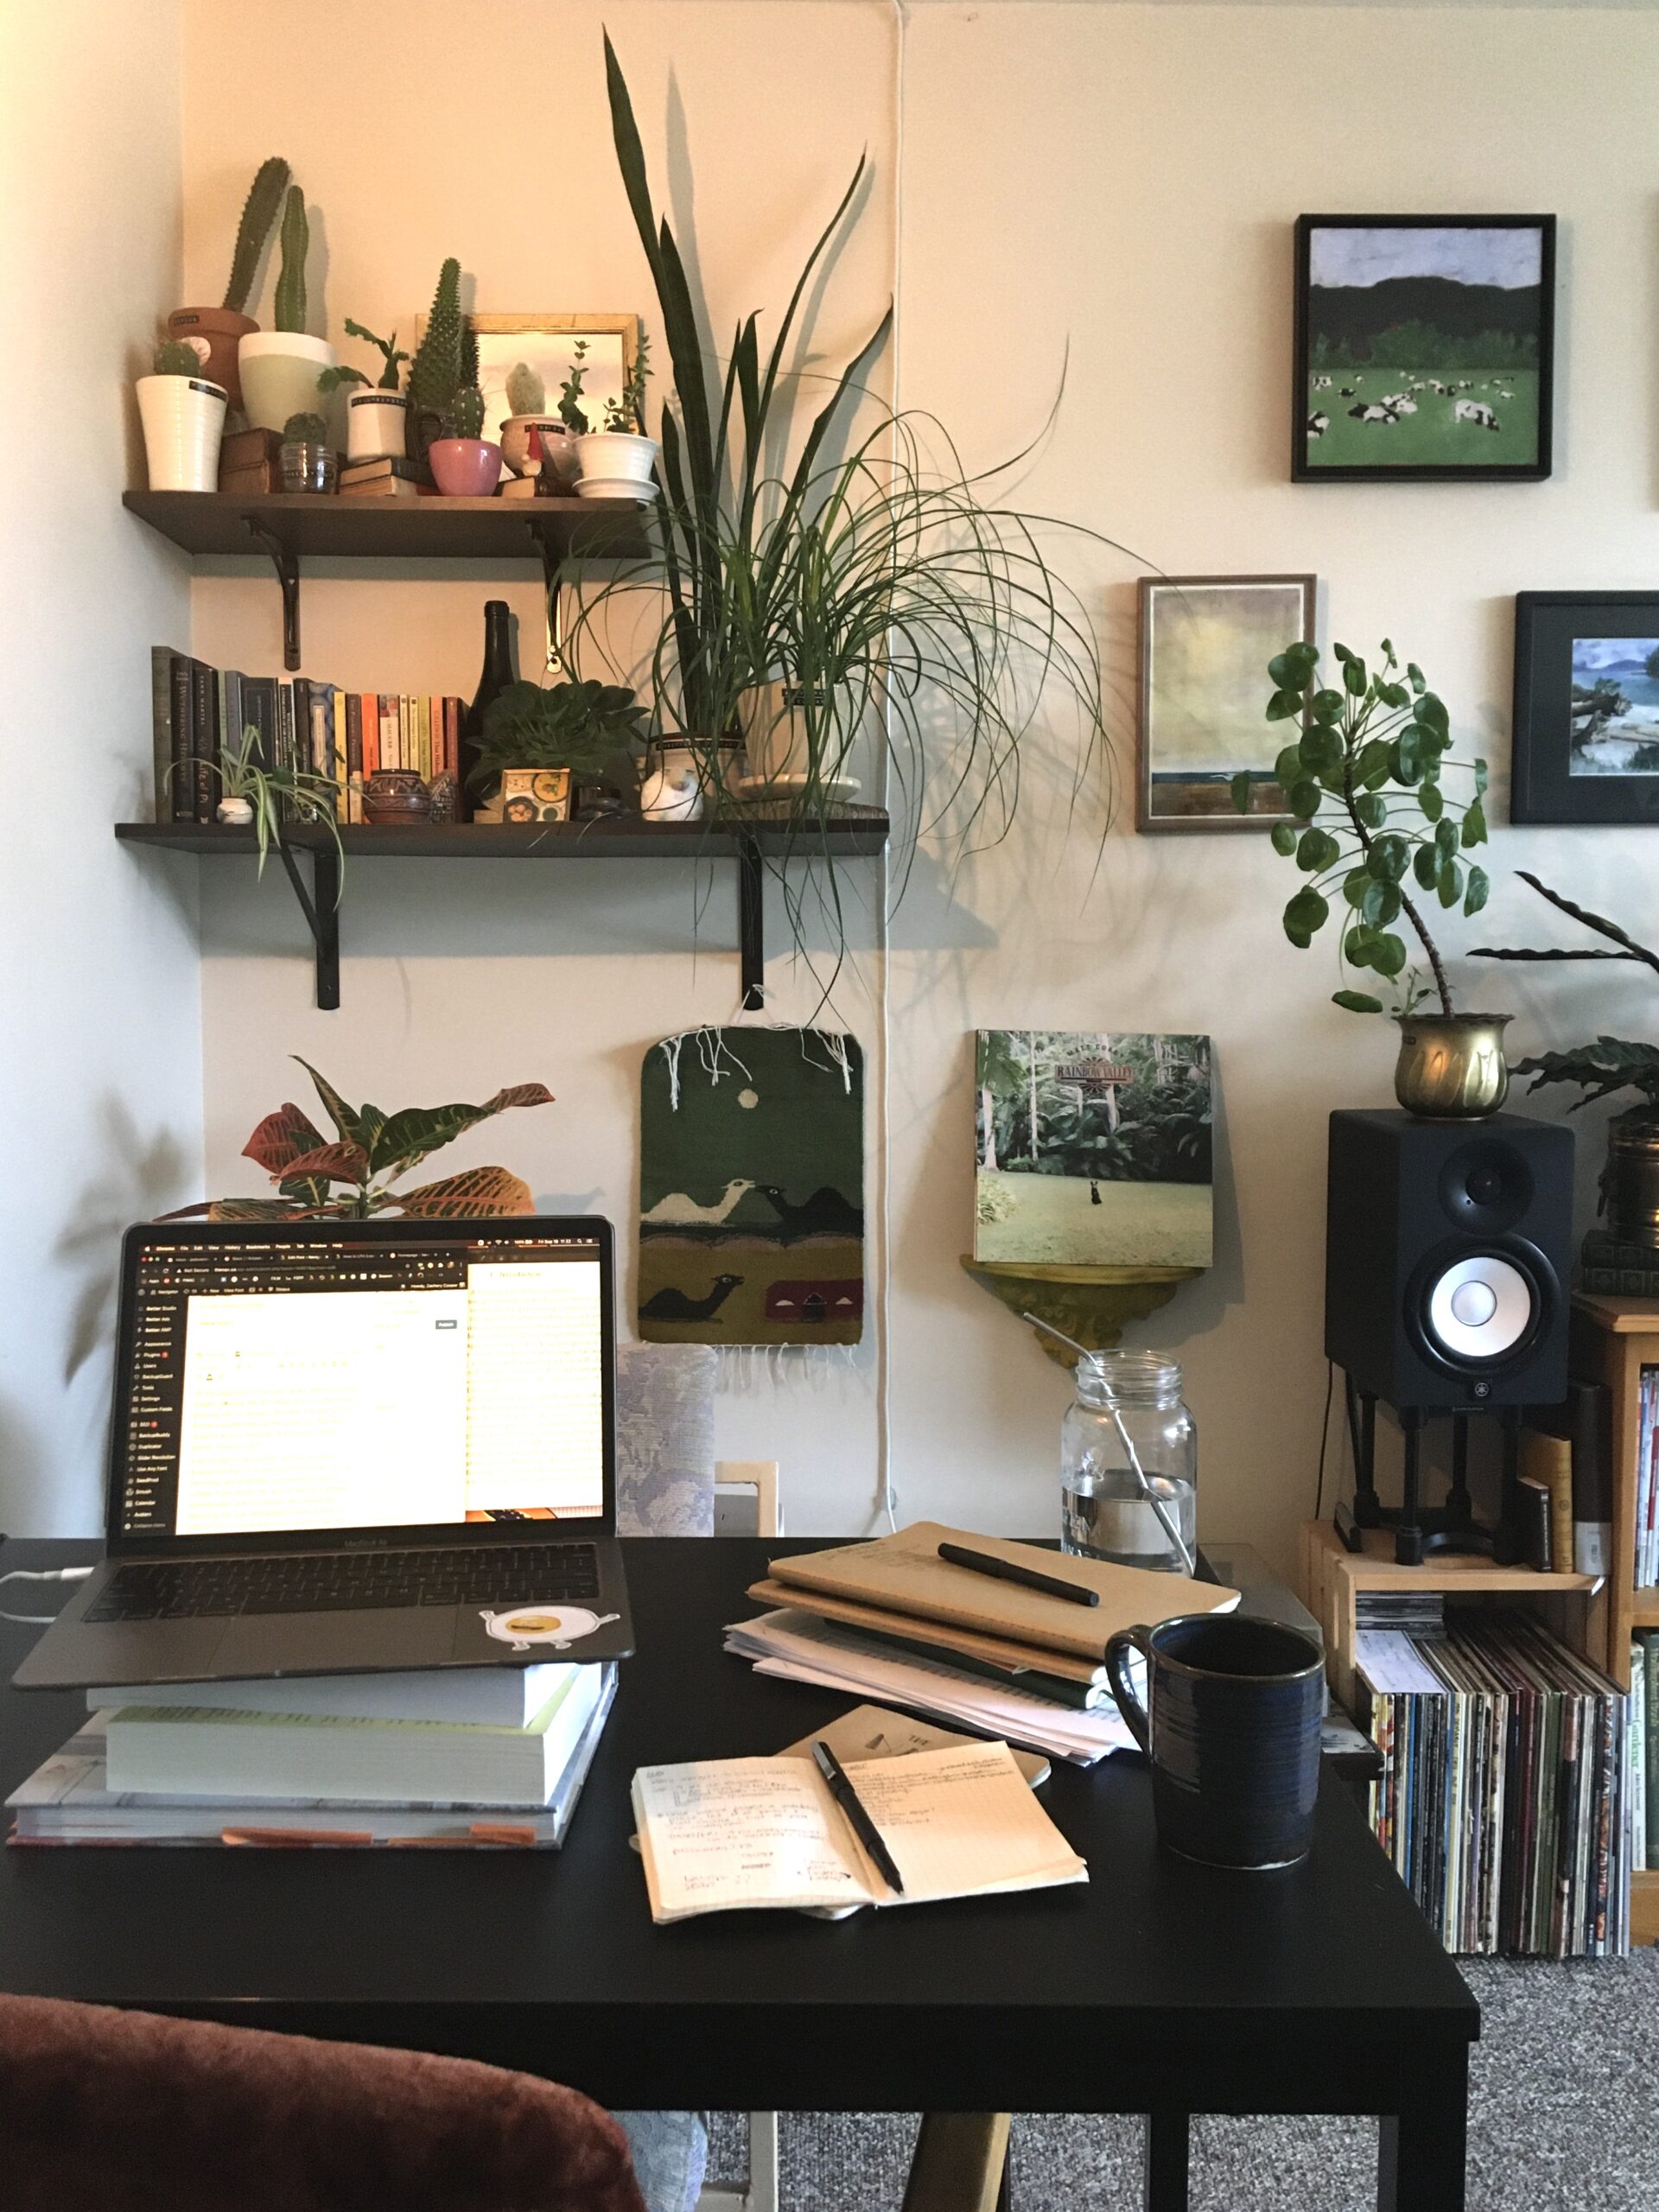 A laptop, notebooks, and mug of coffee sit on a desk in front of a wall of plants and books